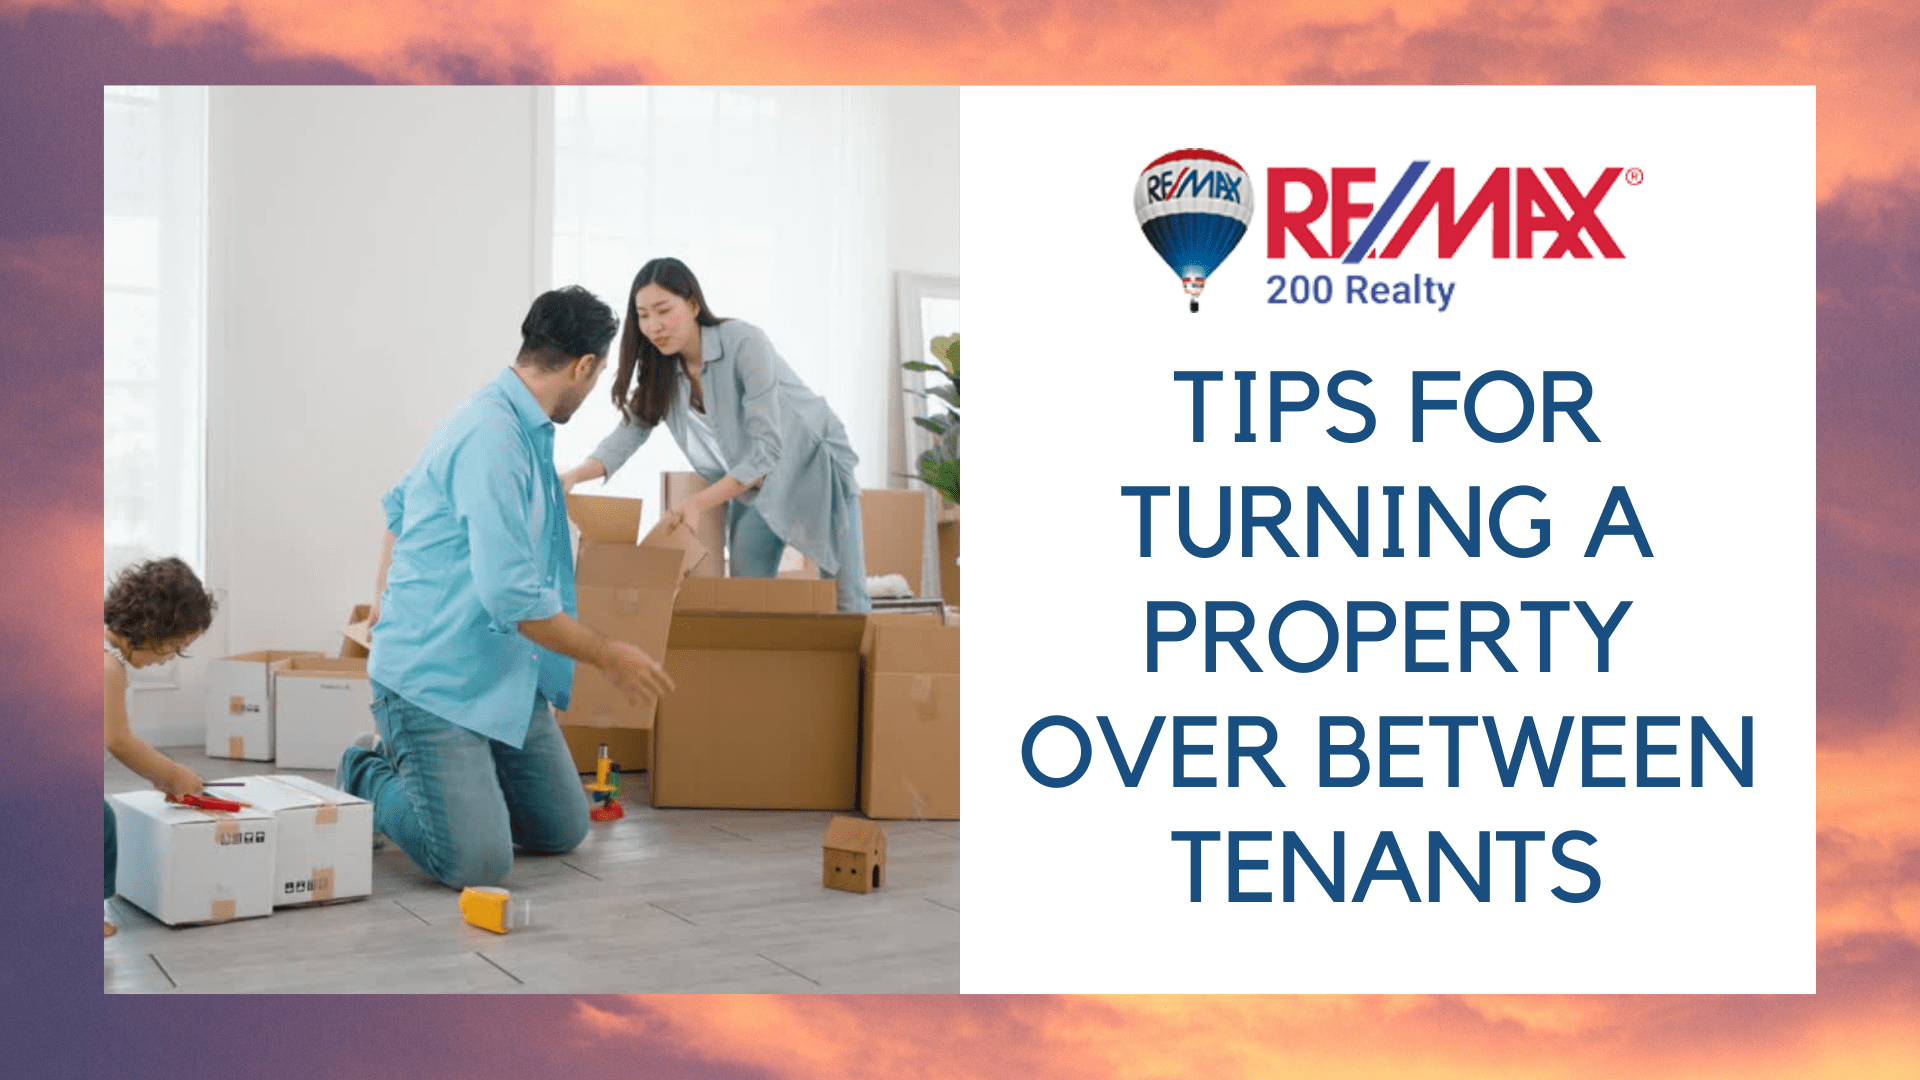 Tips for Turning a Property Over Between Tenants